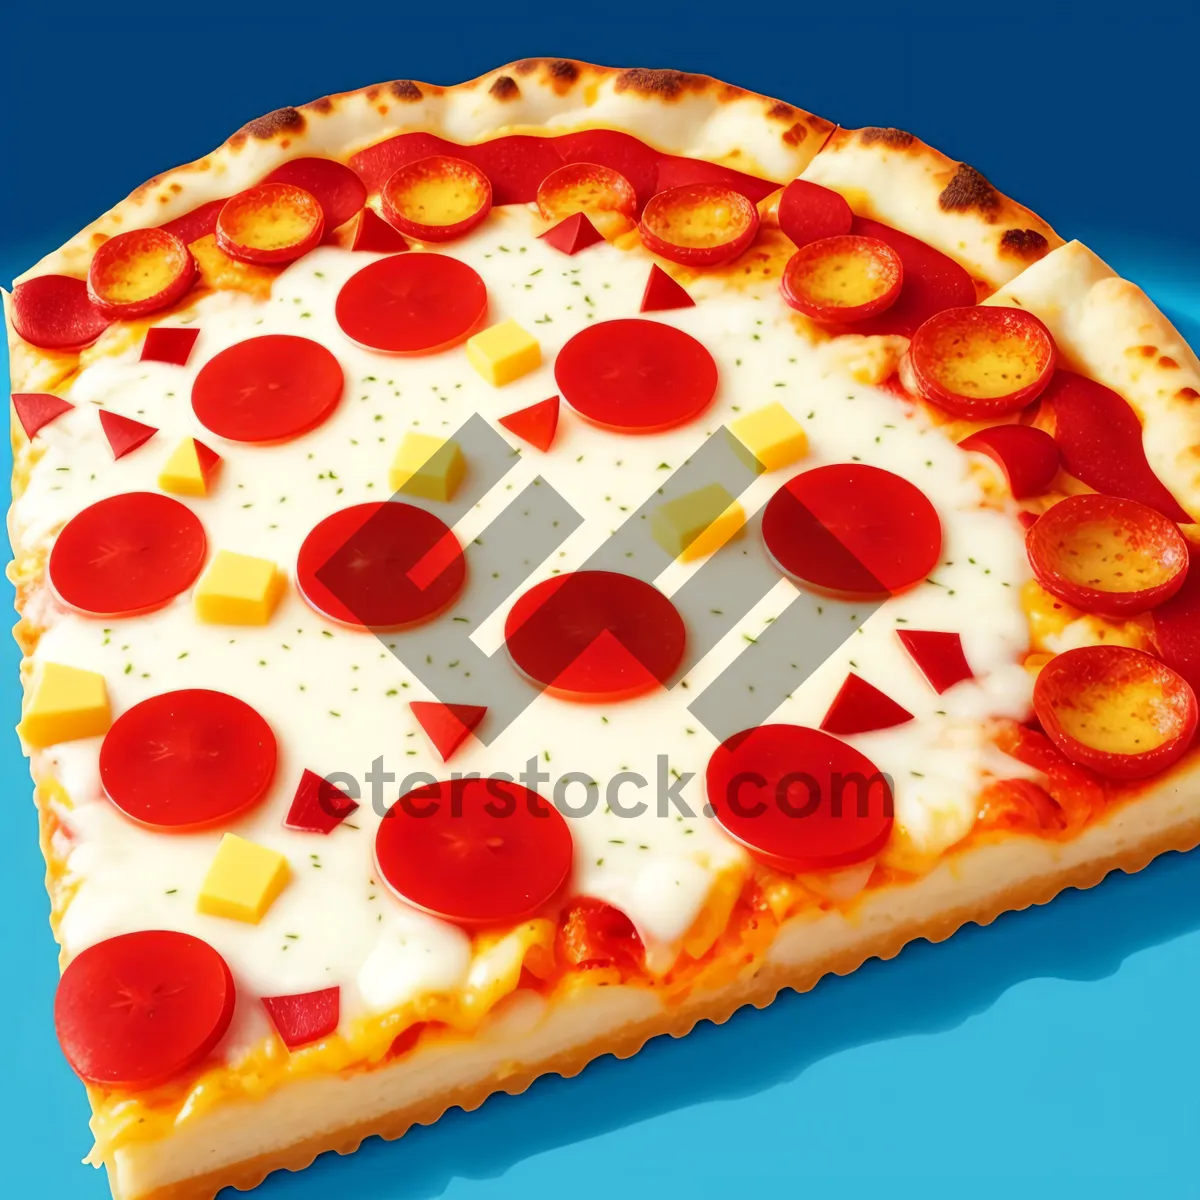 Picture of Delicious Gourmet Pizza Slice on Plate